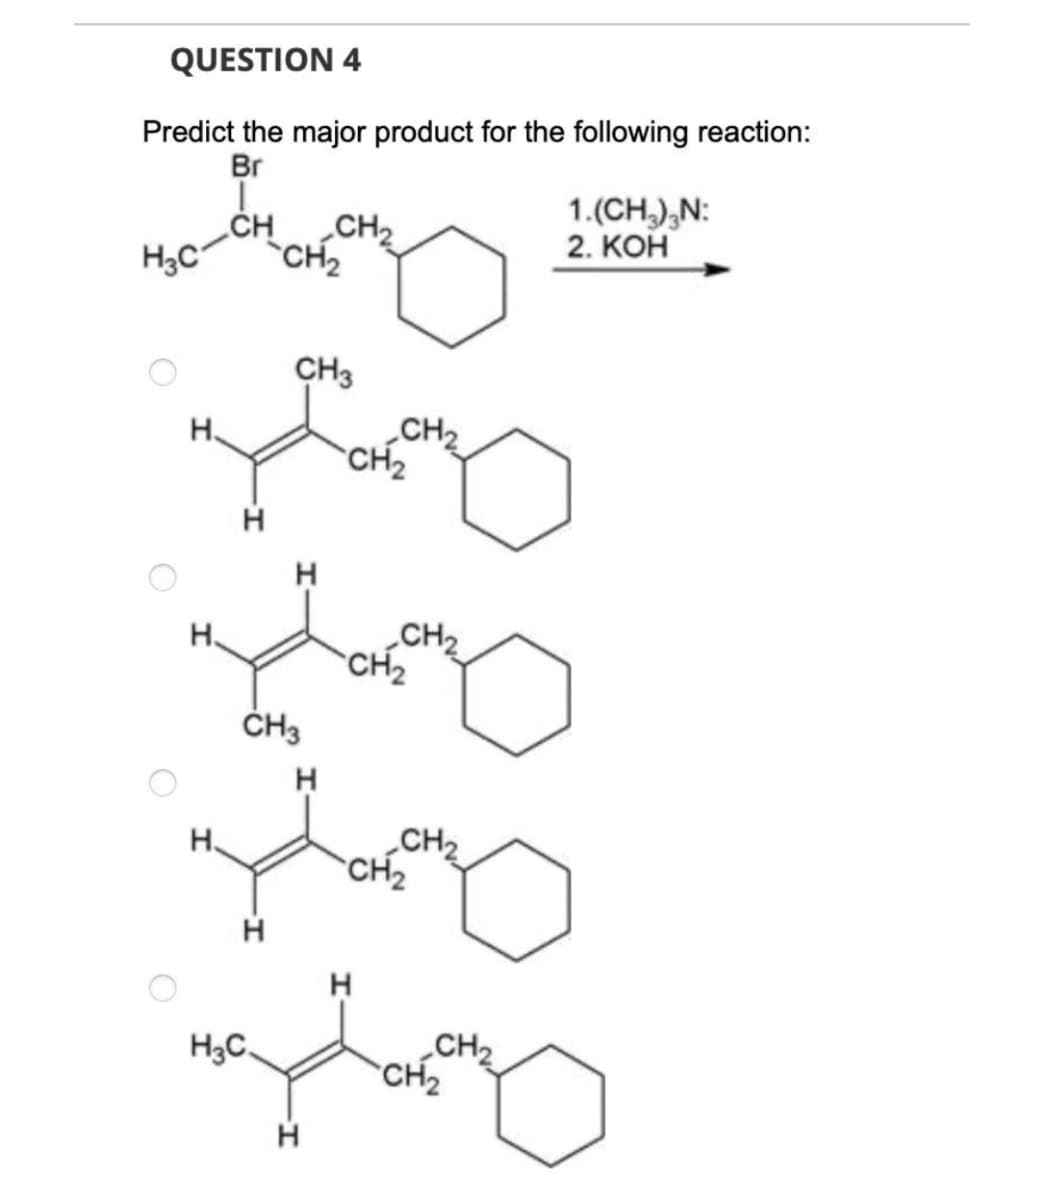 QUESTION 4
Predict the major product for the following reaction:
Br
1.(CH,),N:
2. КОН
.CH
CH2
H3C
CH2
CH3
CH2
CH2
H.
H
CH2
CH2
H.
H
CH2
CH2
H.
H
H
CH2
CH2
H3C,
